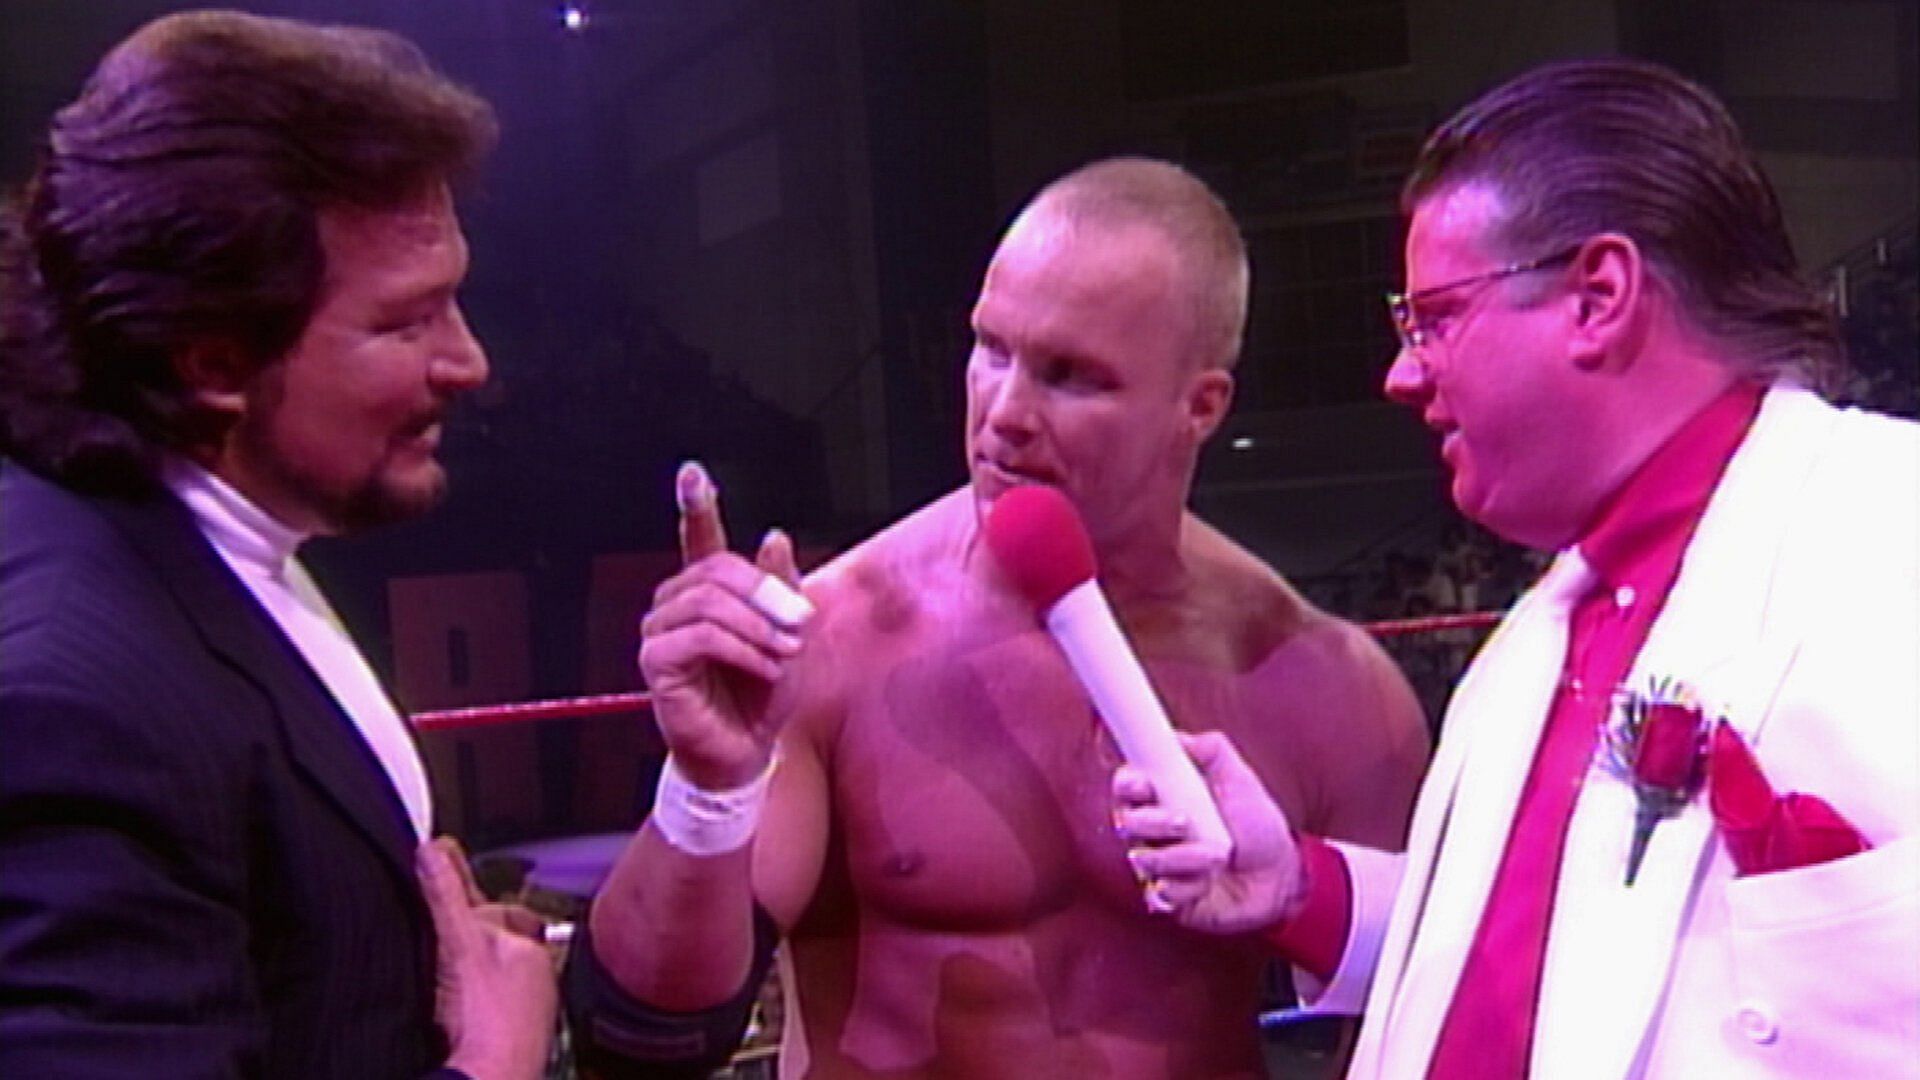 Ted Dibiase, Steve Austin, and Brother Love